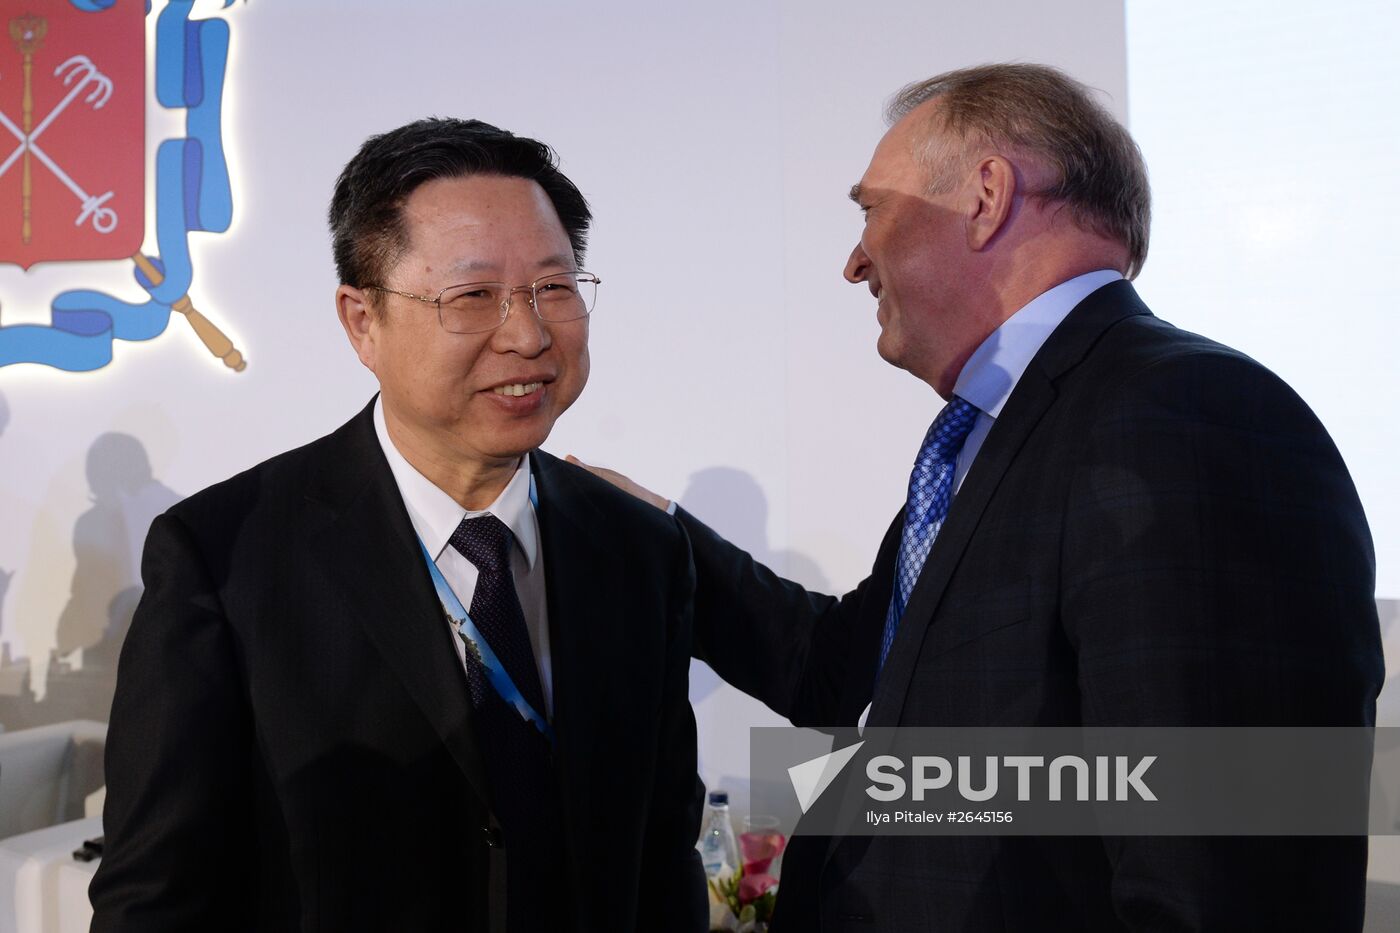 BRICS Business Forum at the SPIEF